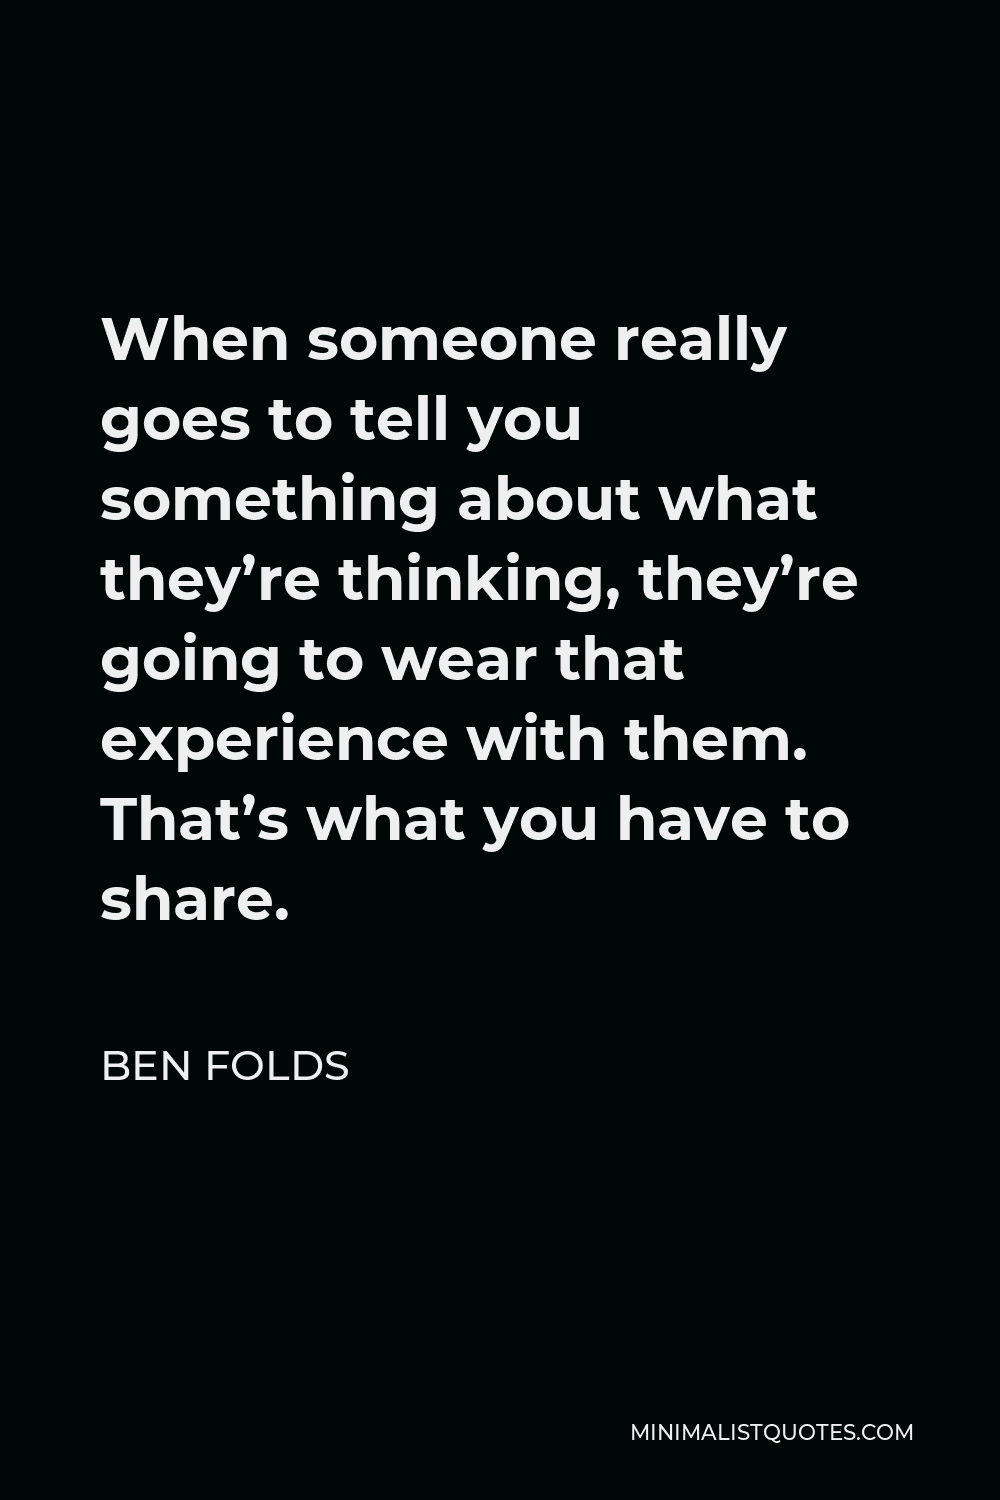 Ben Folds Quote - When someone really goes to tell you something about what they’re thinking, they’re going to wear that experience with them. That’s what you have to share.